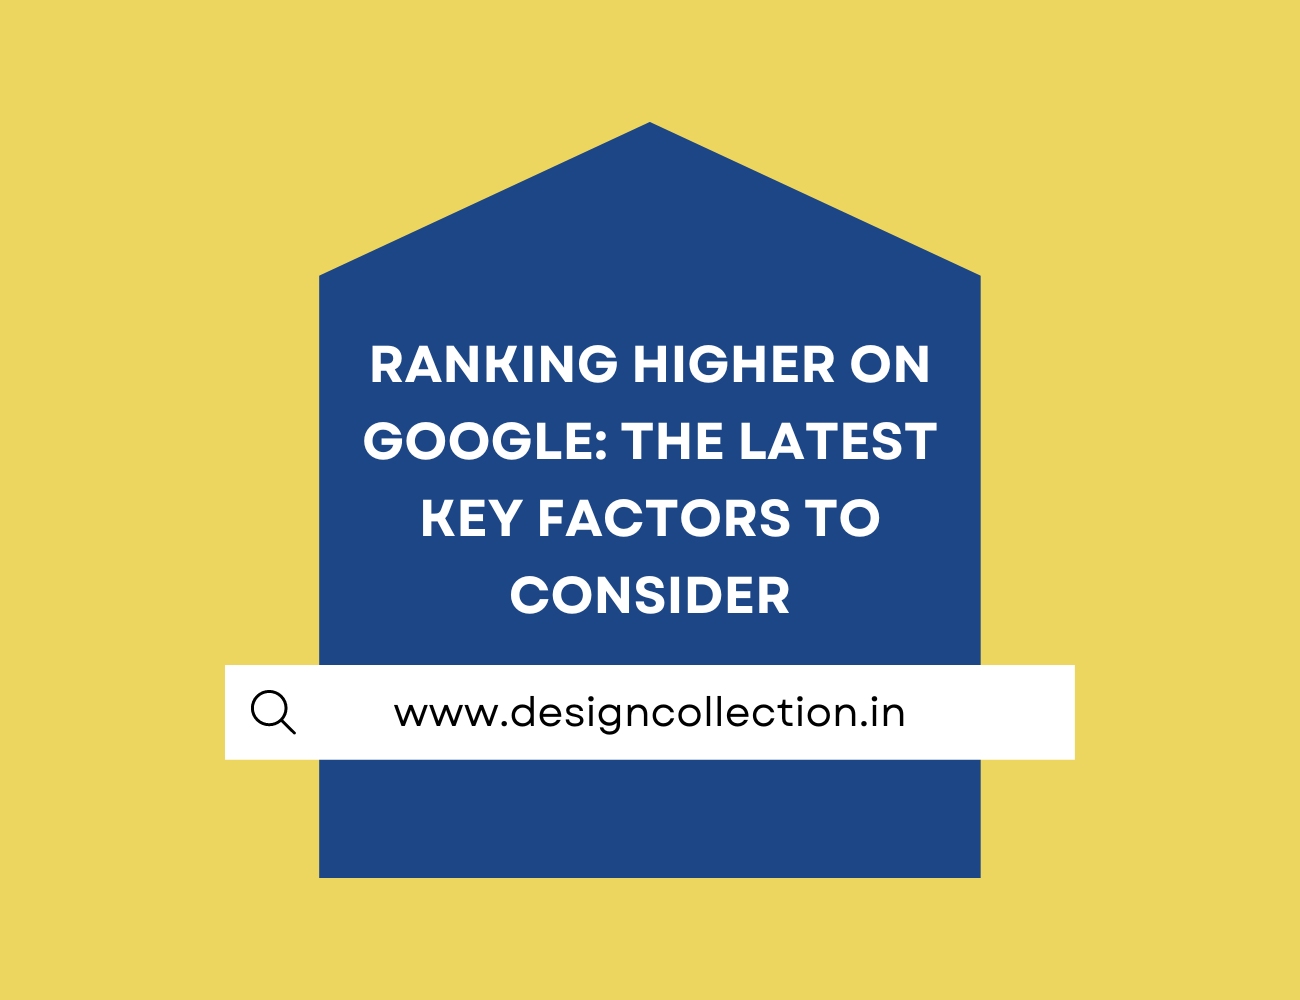 Ranking higher on google, the latest key factors to consider